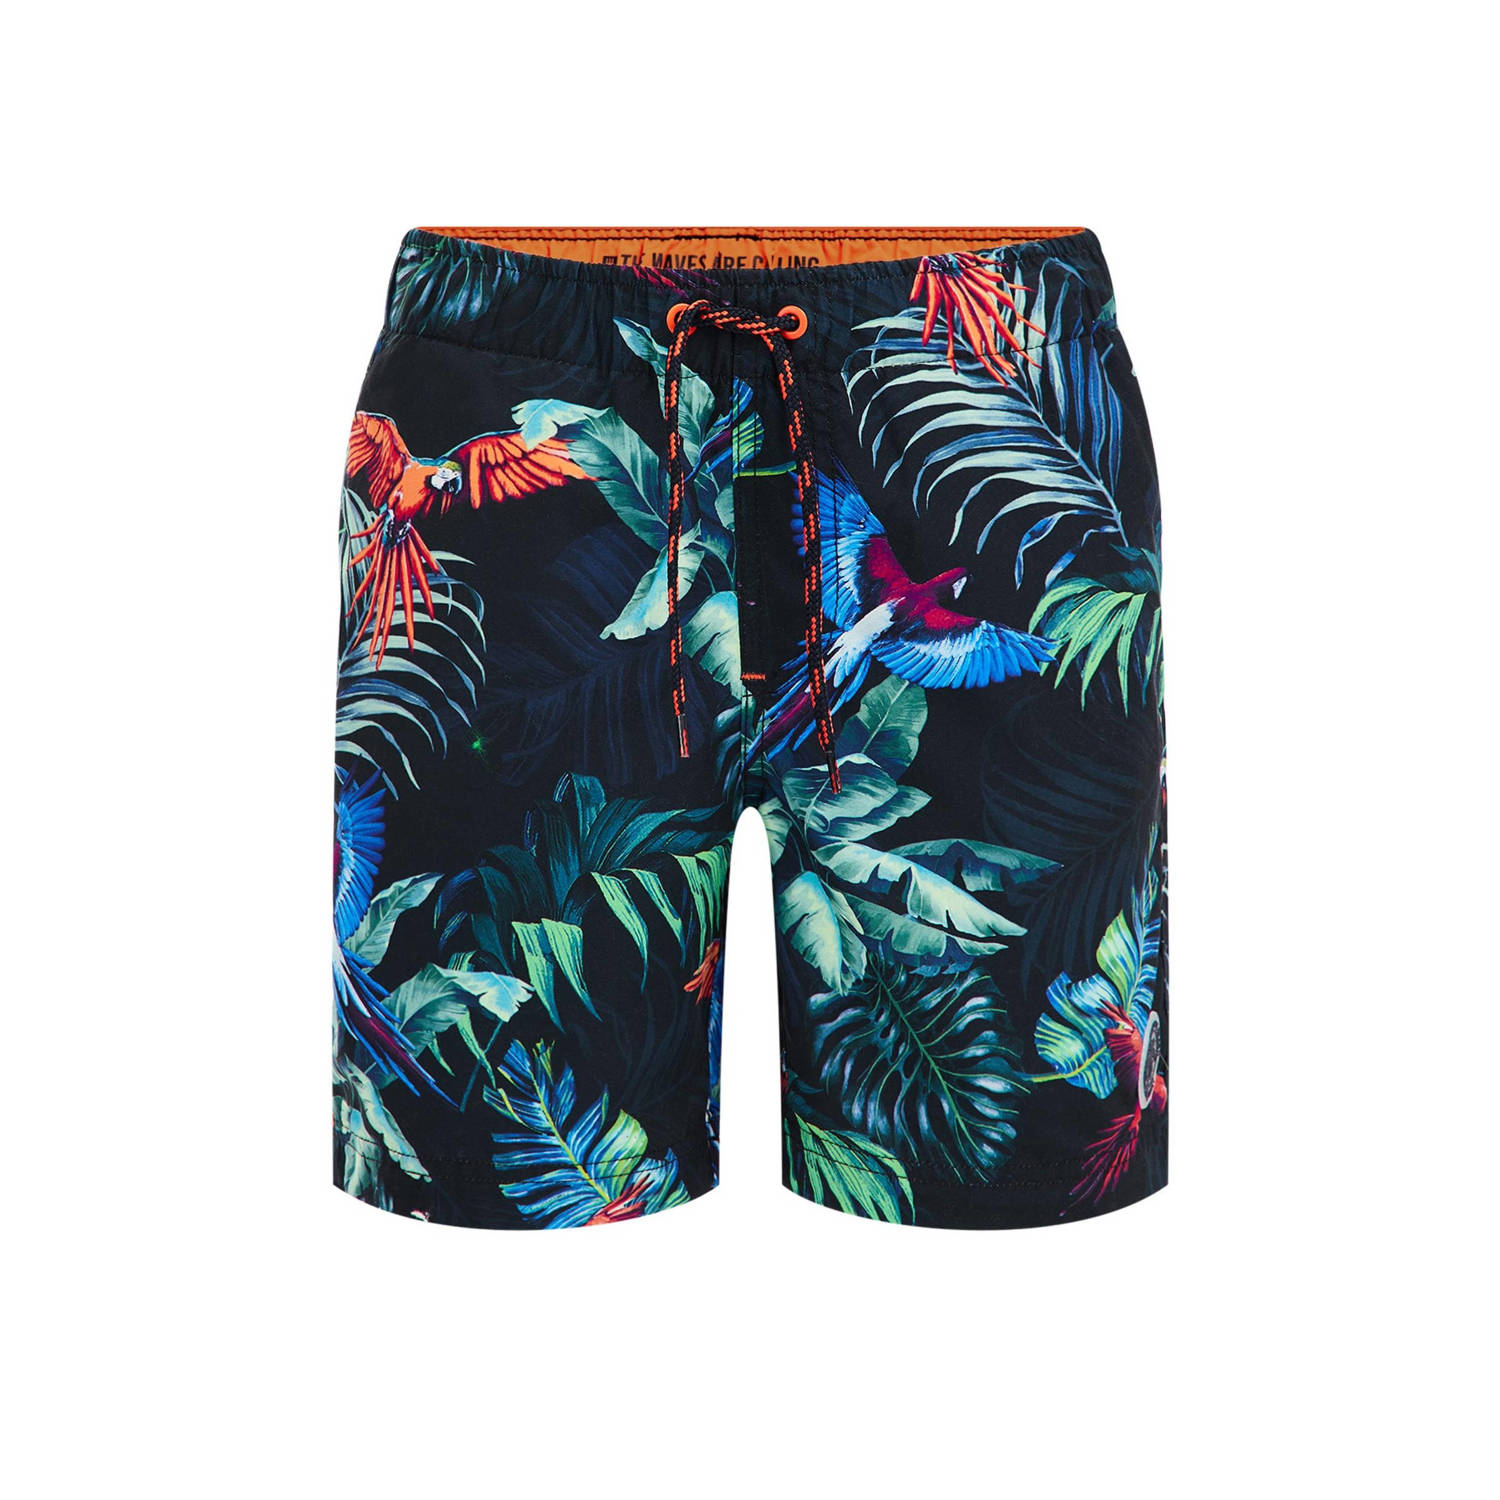 WE Fashion zwemshort donkerblauw Jongens Gerecycled polyester All over print 110 116